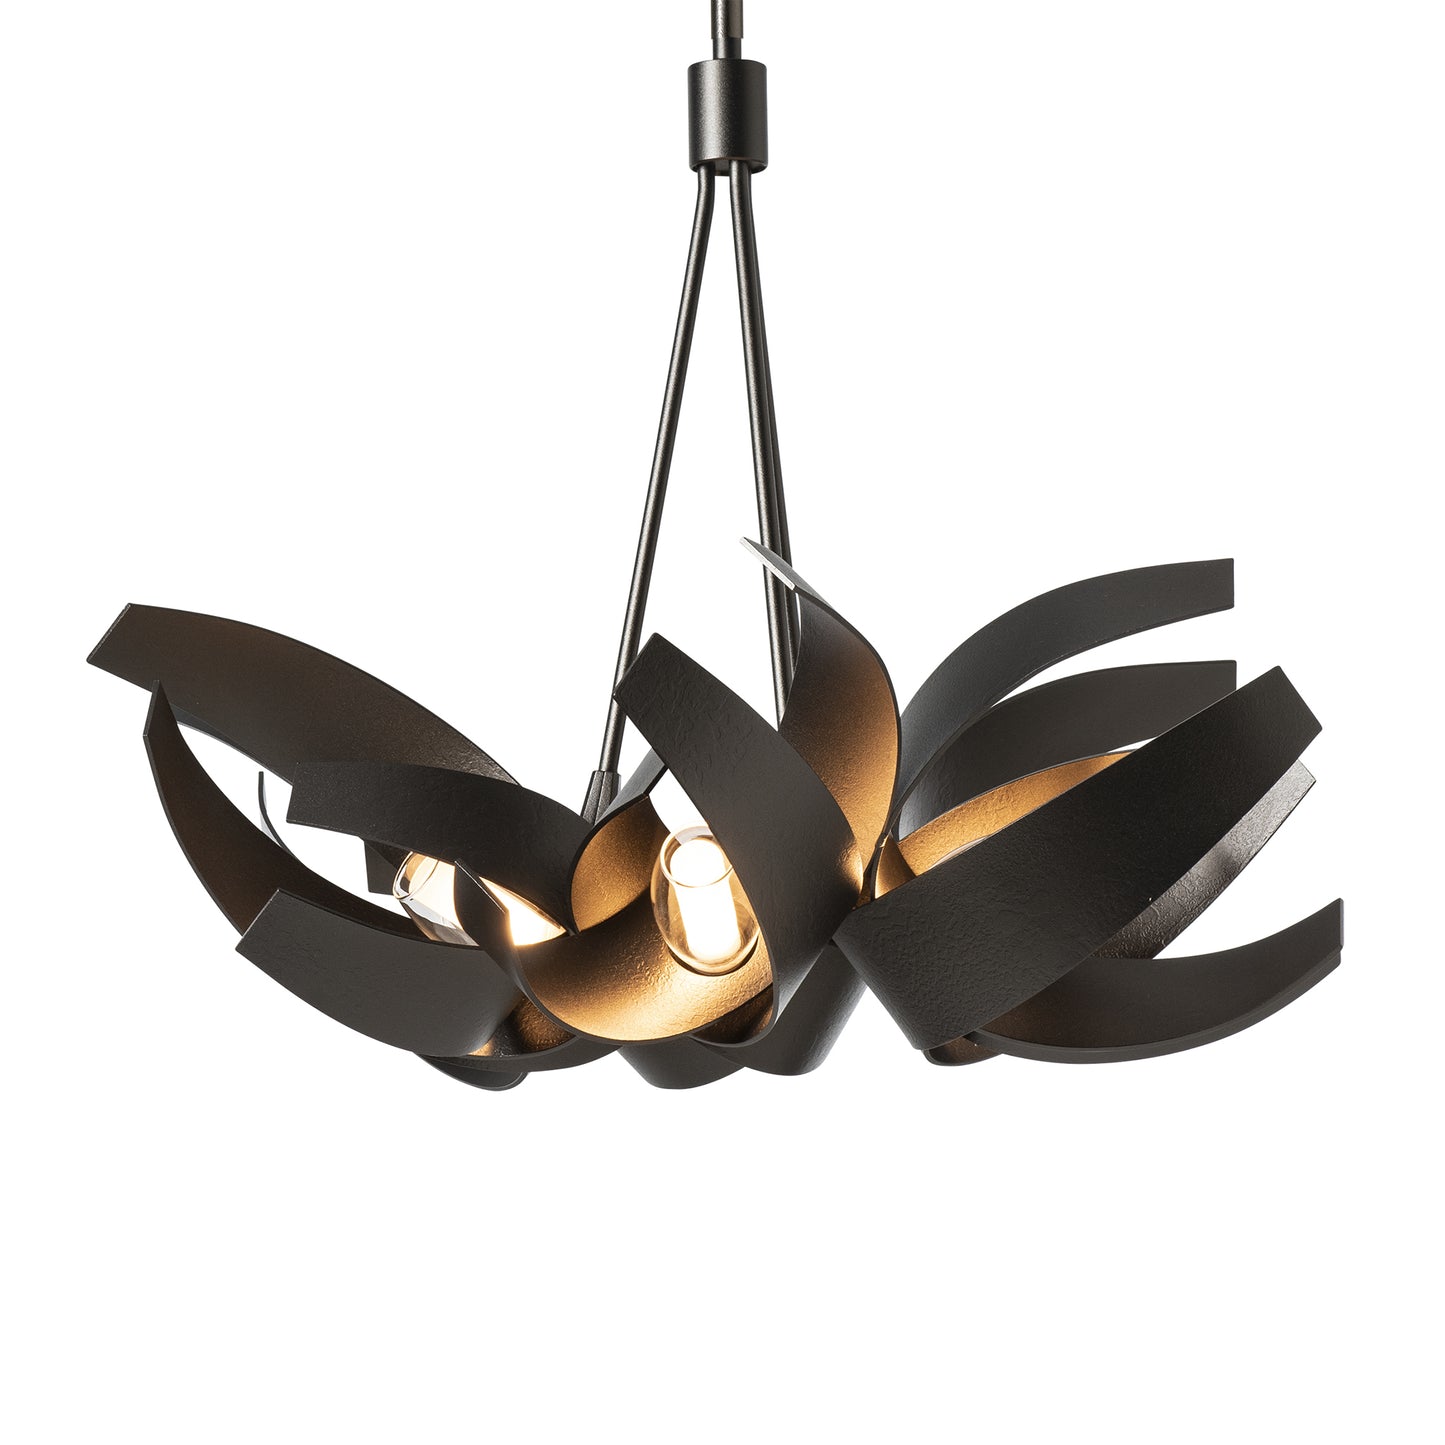 A Corona pendant from Hubbardton Forge with a black and gold design.